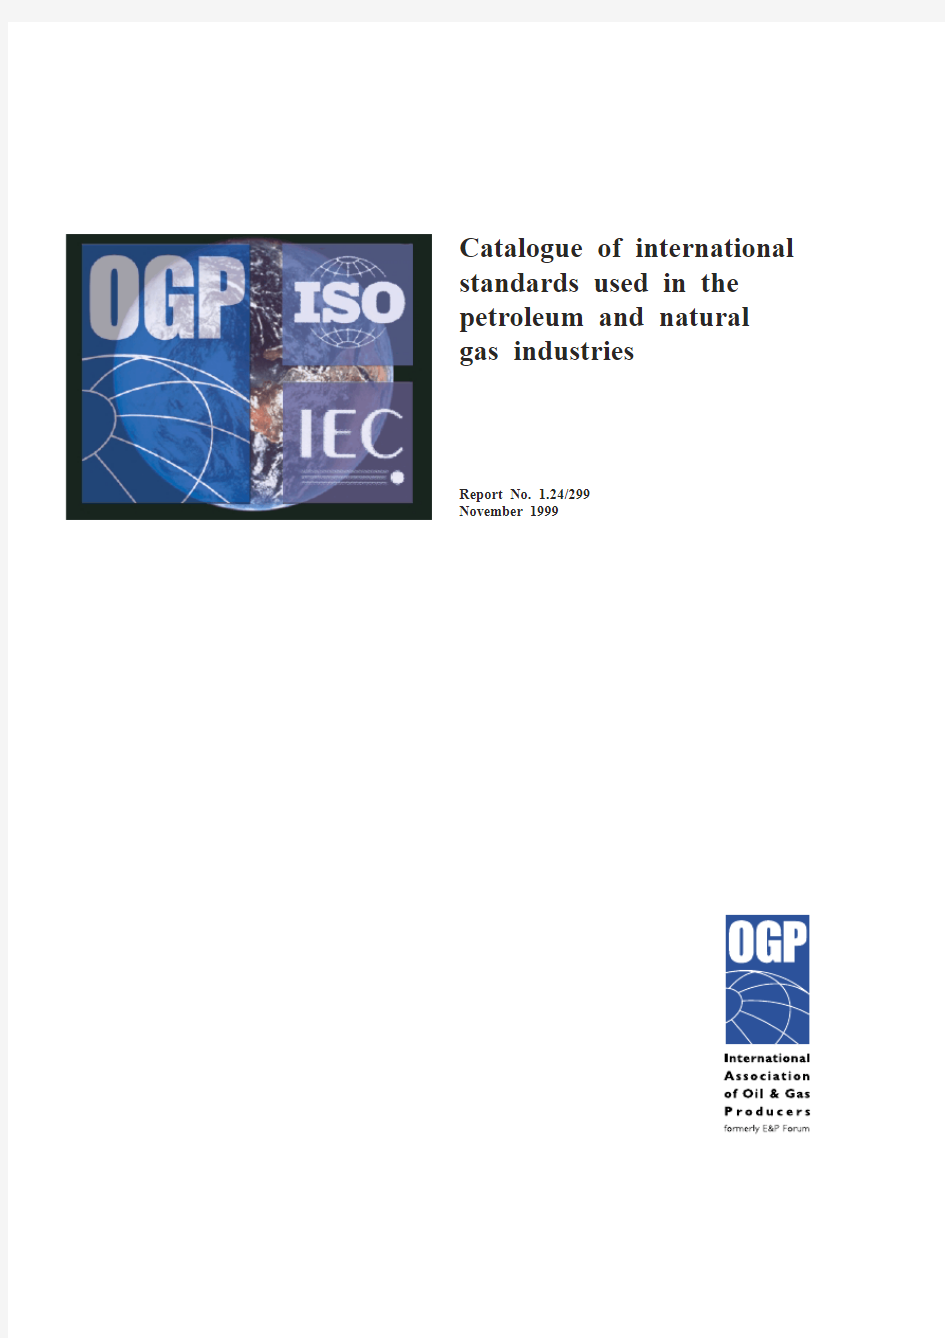 International Standards in the Oil and Gas Industry (OGP) 1999